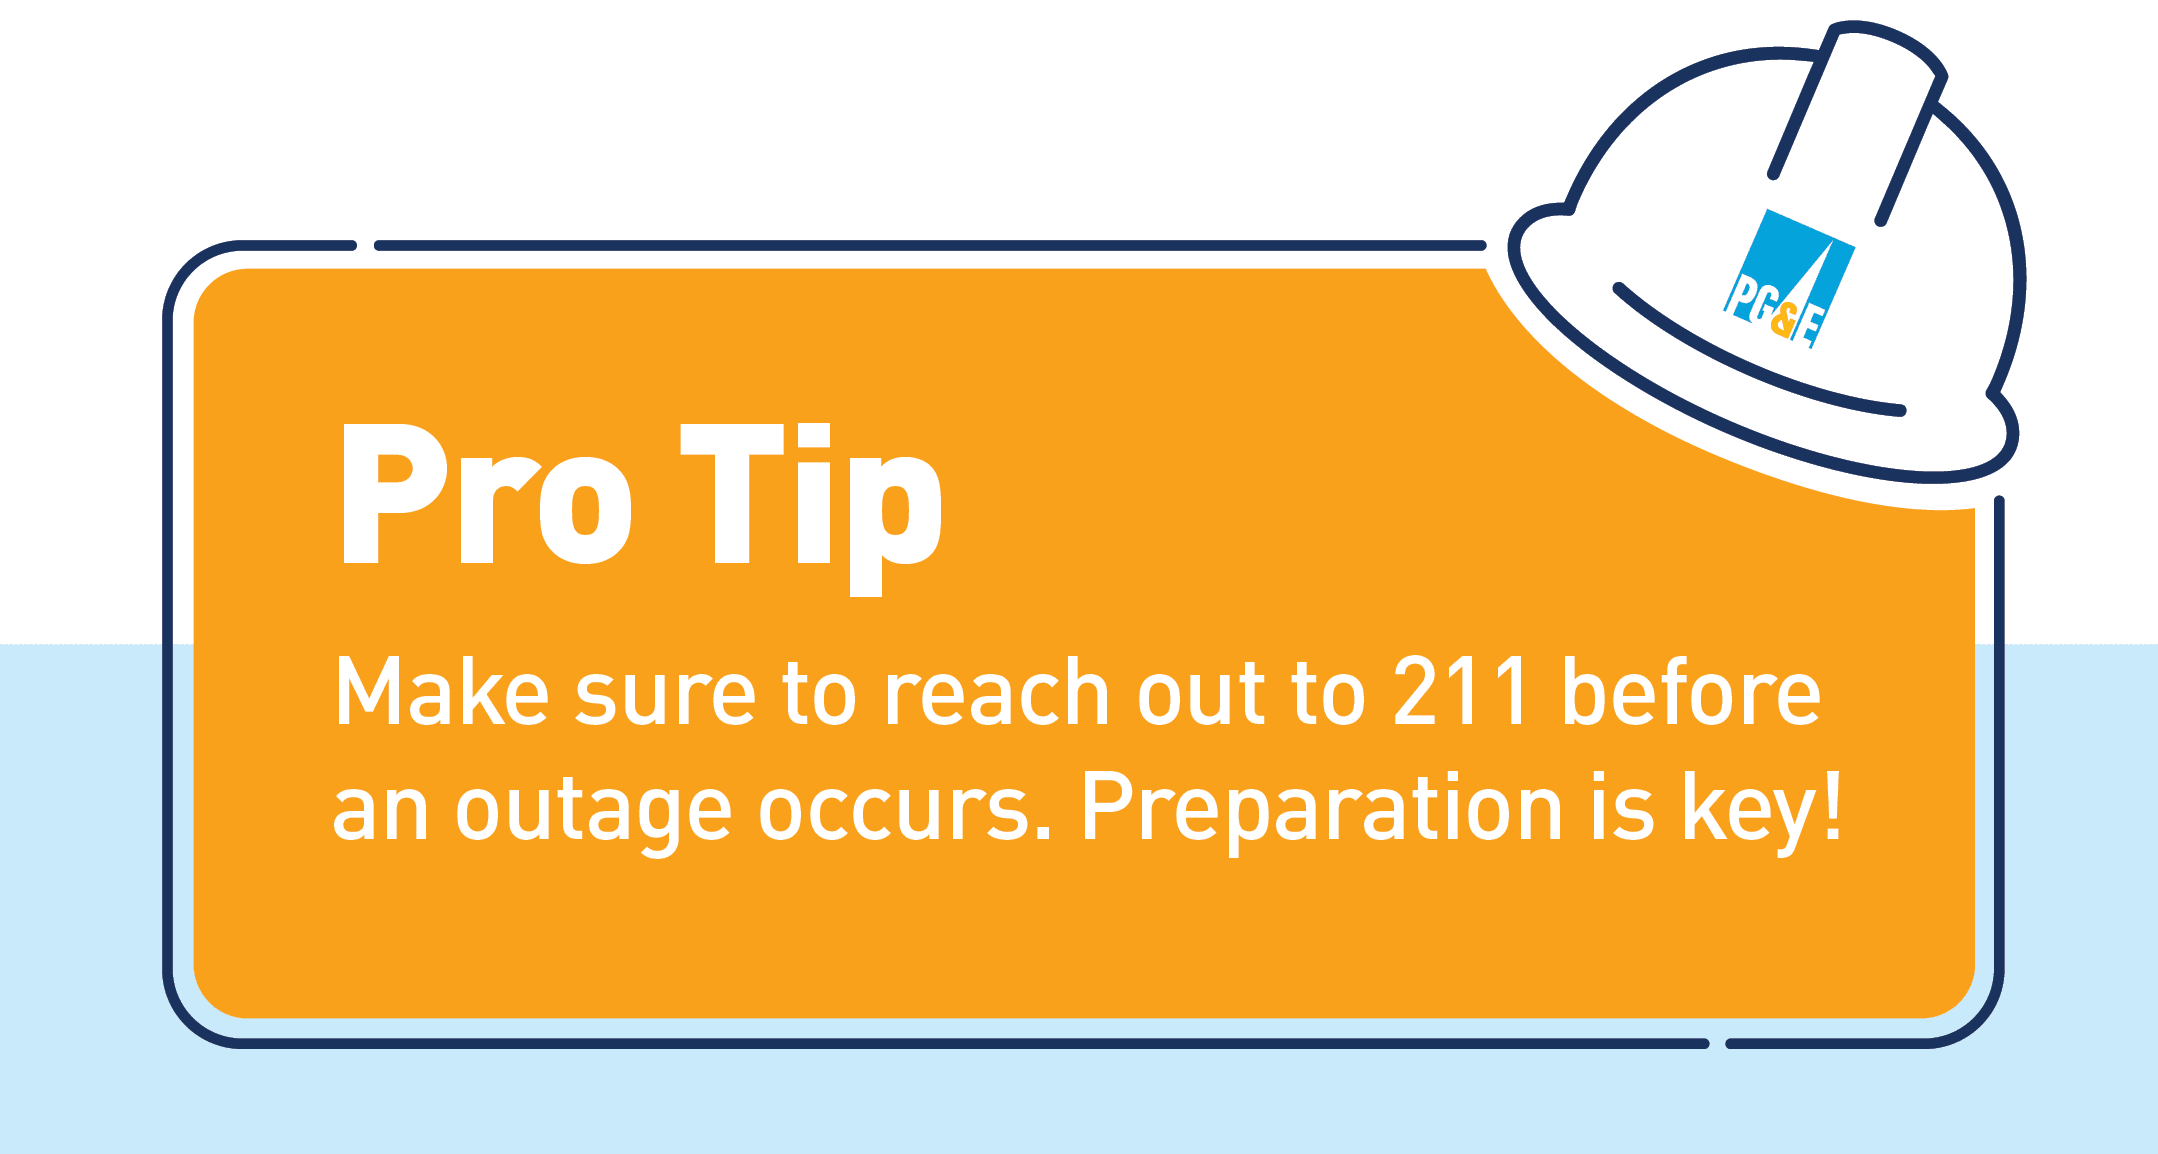 Pro Tip: Make sure to reach out to 211 before an outage occurs. Preparation is key!